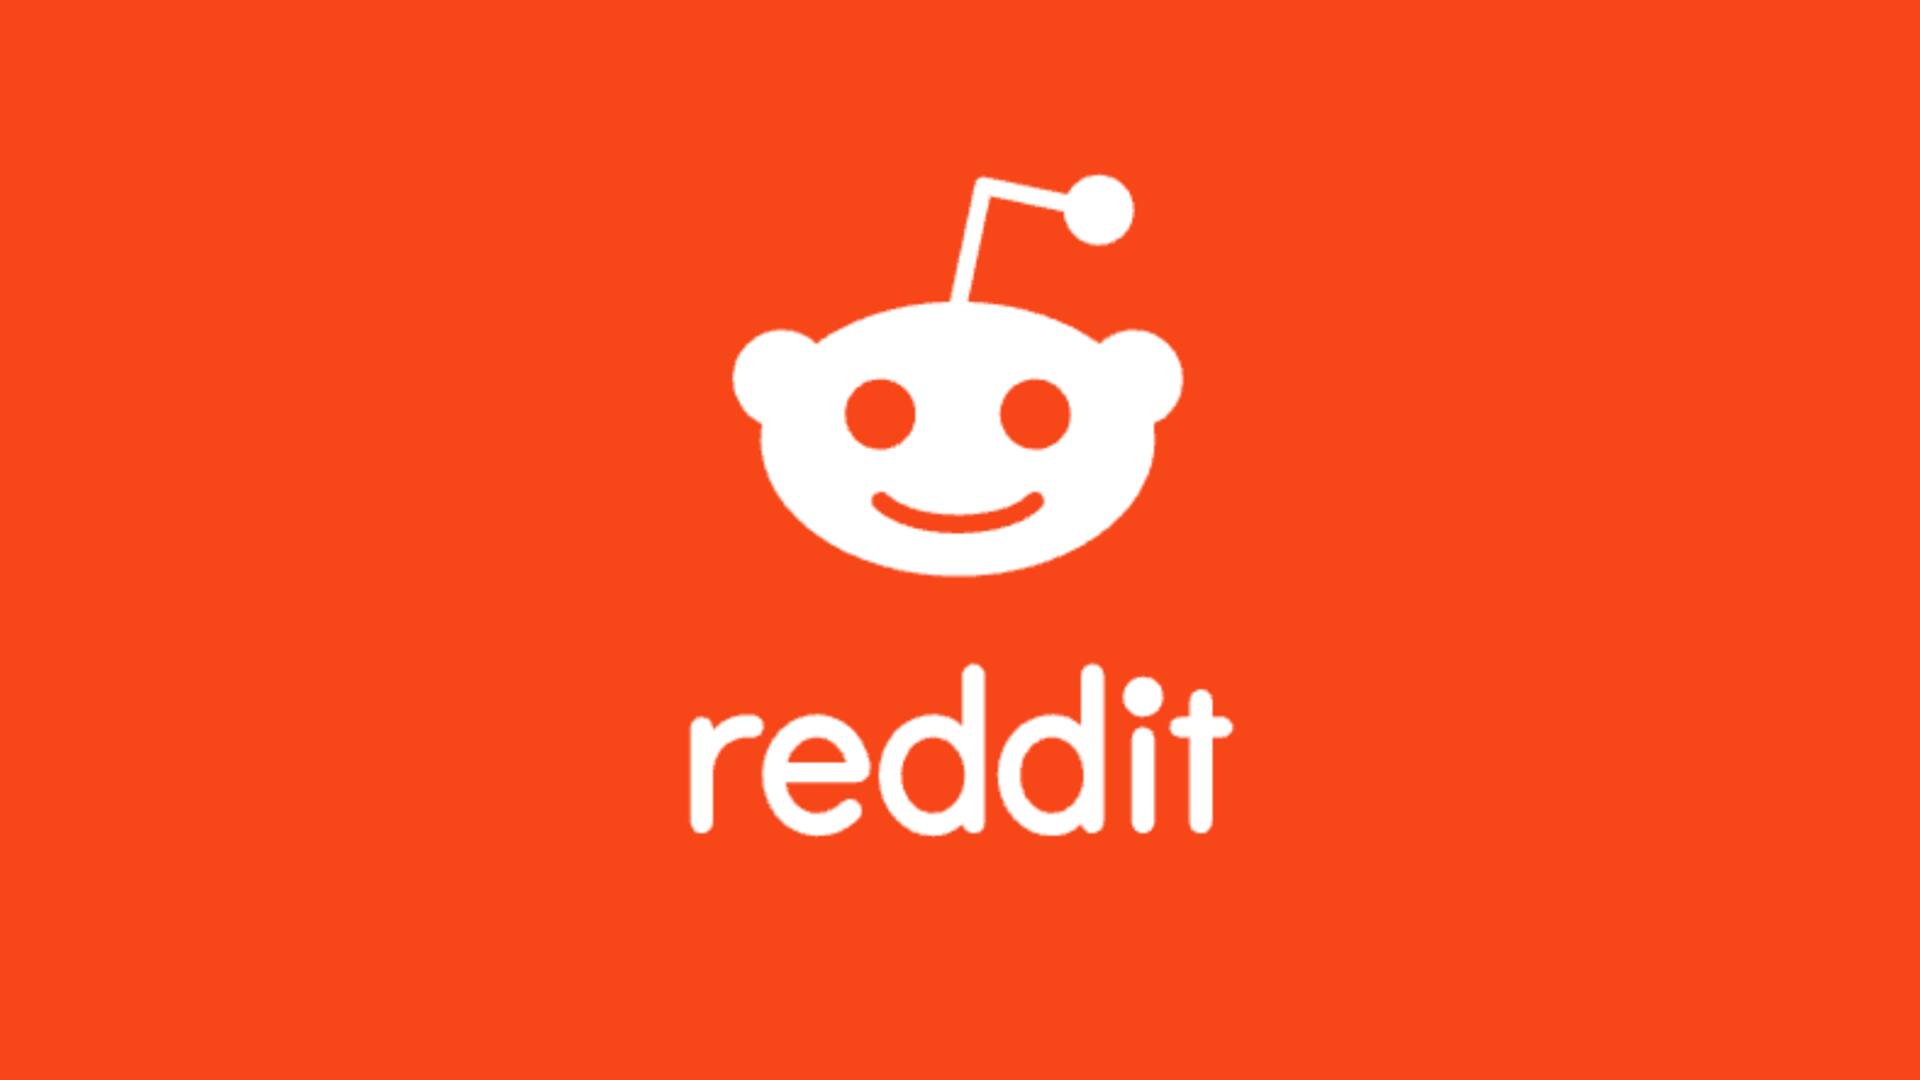 Reddit introduces multilingual translation feature for posts: How it works